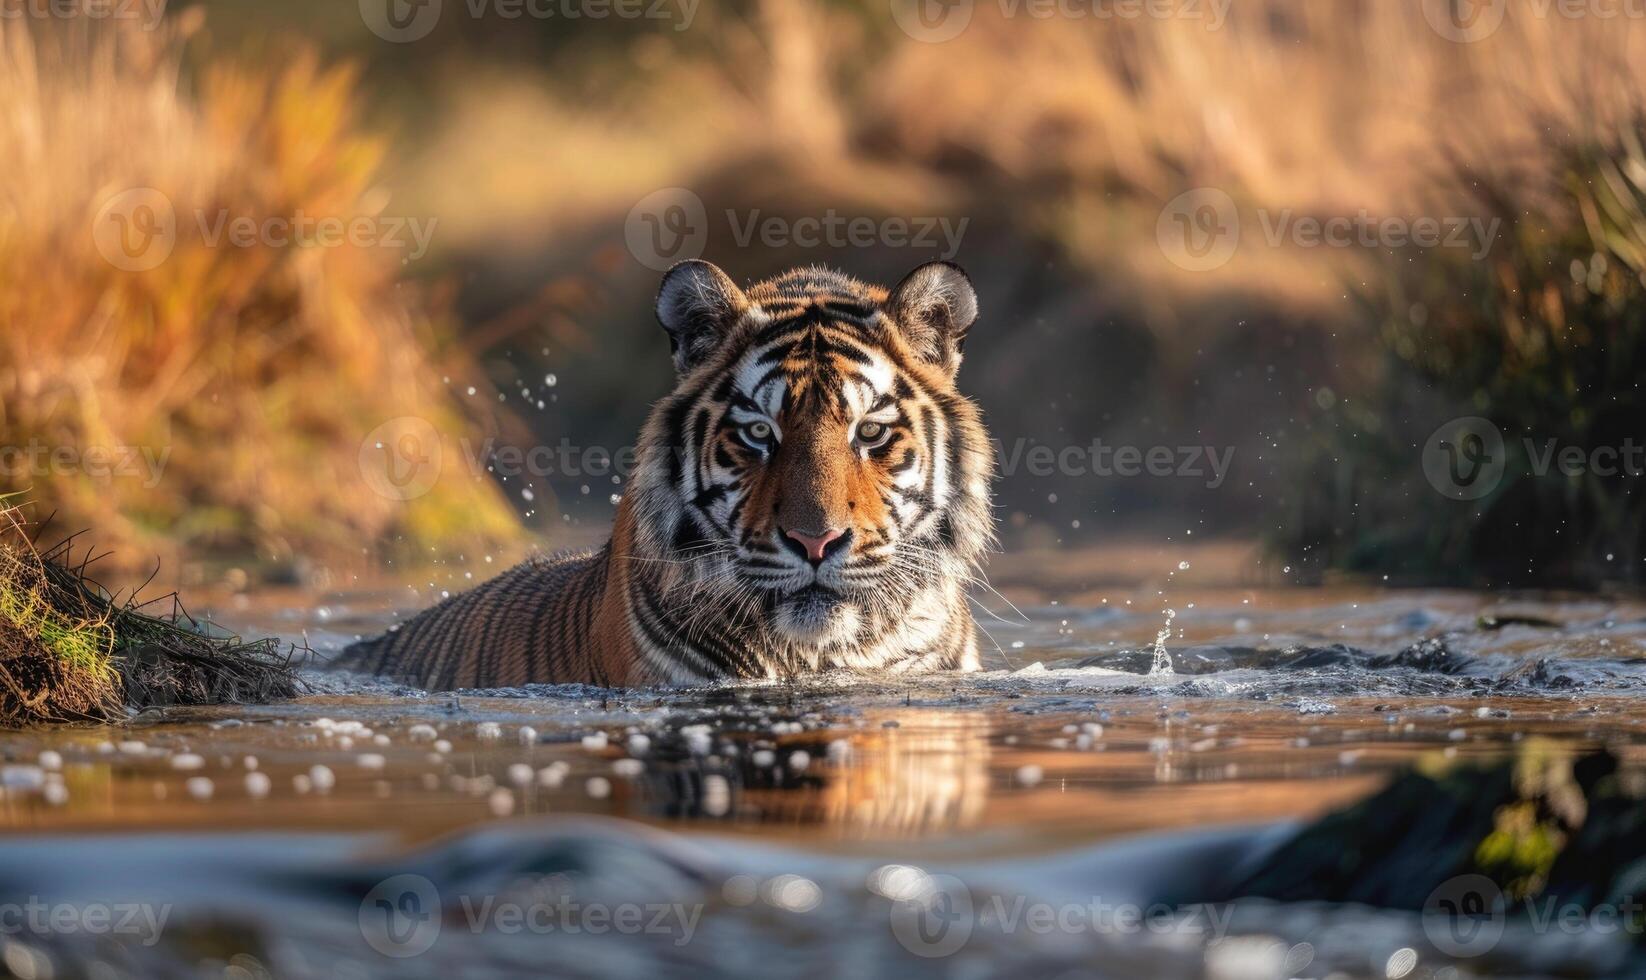 An Amur tiger bathing in a shallow stream photo